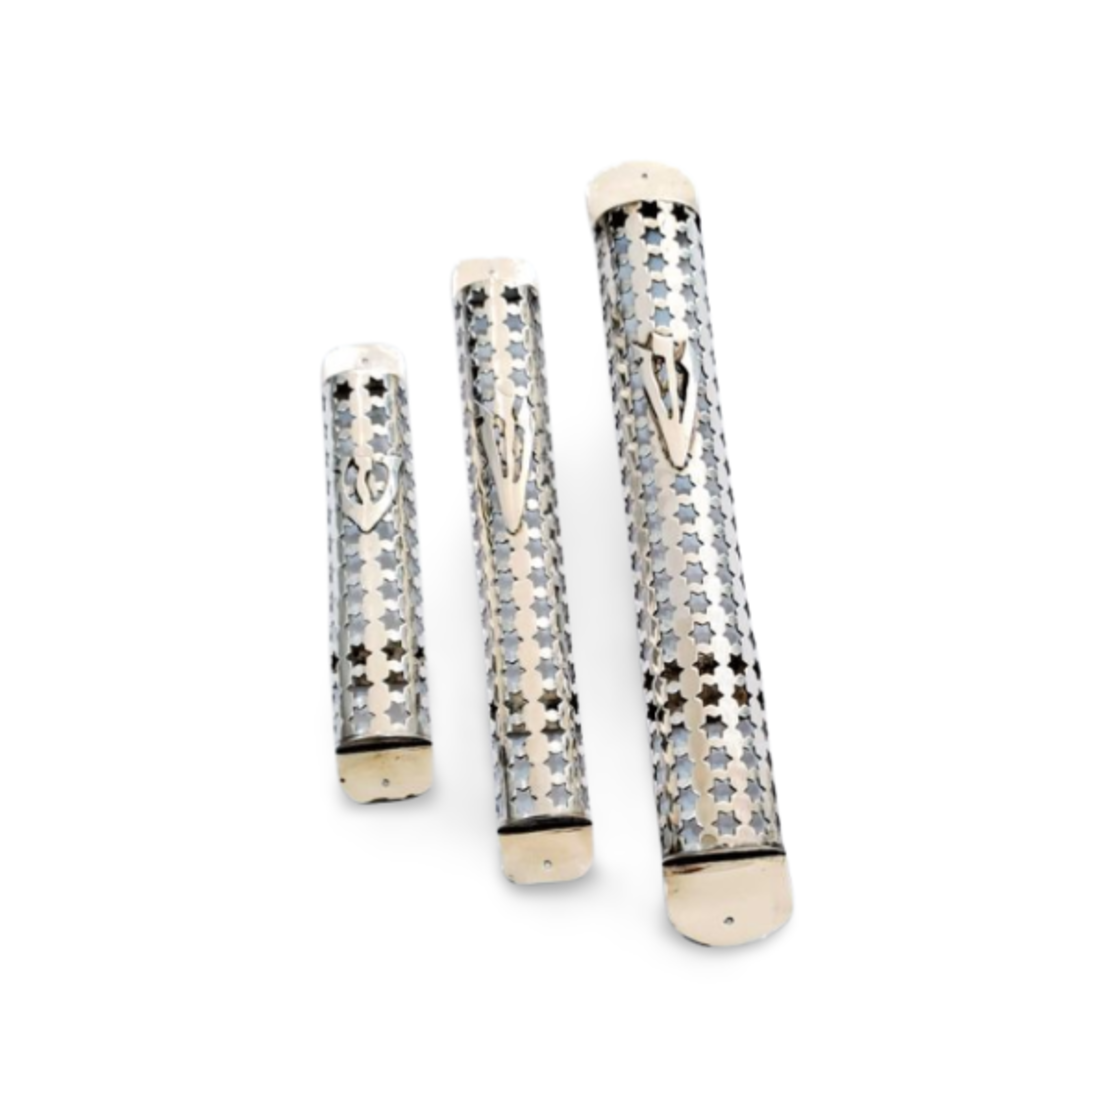 Star of David mezuzah in a selection of sizes pure silver